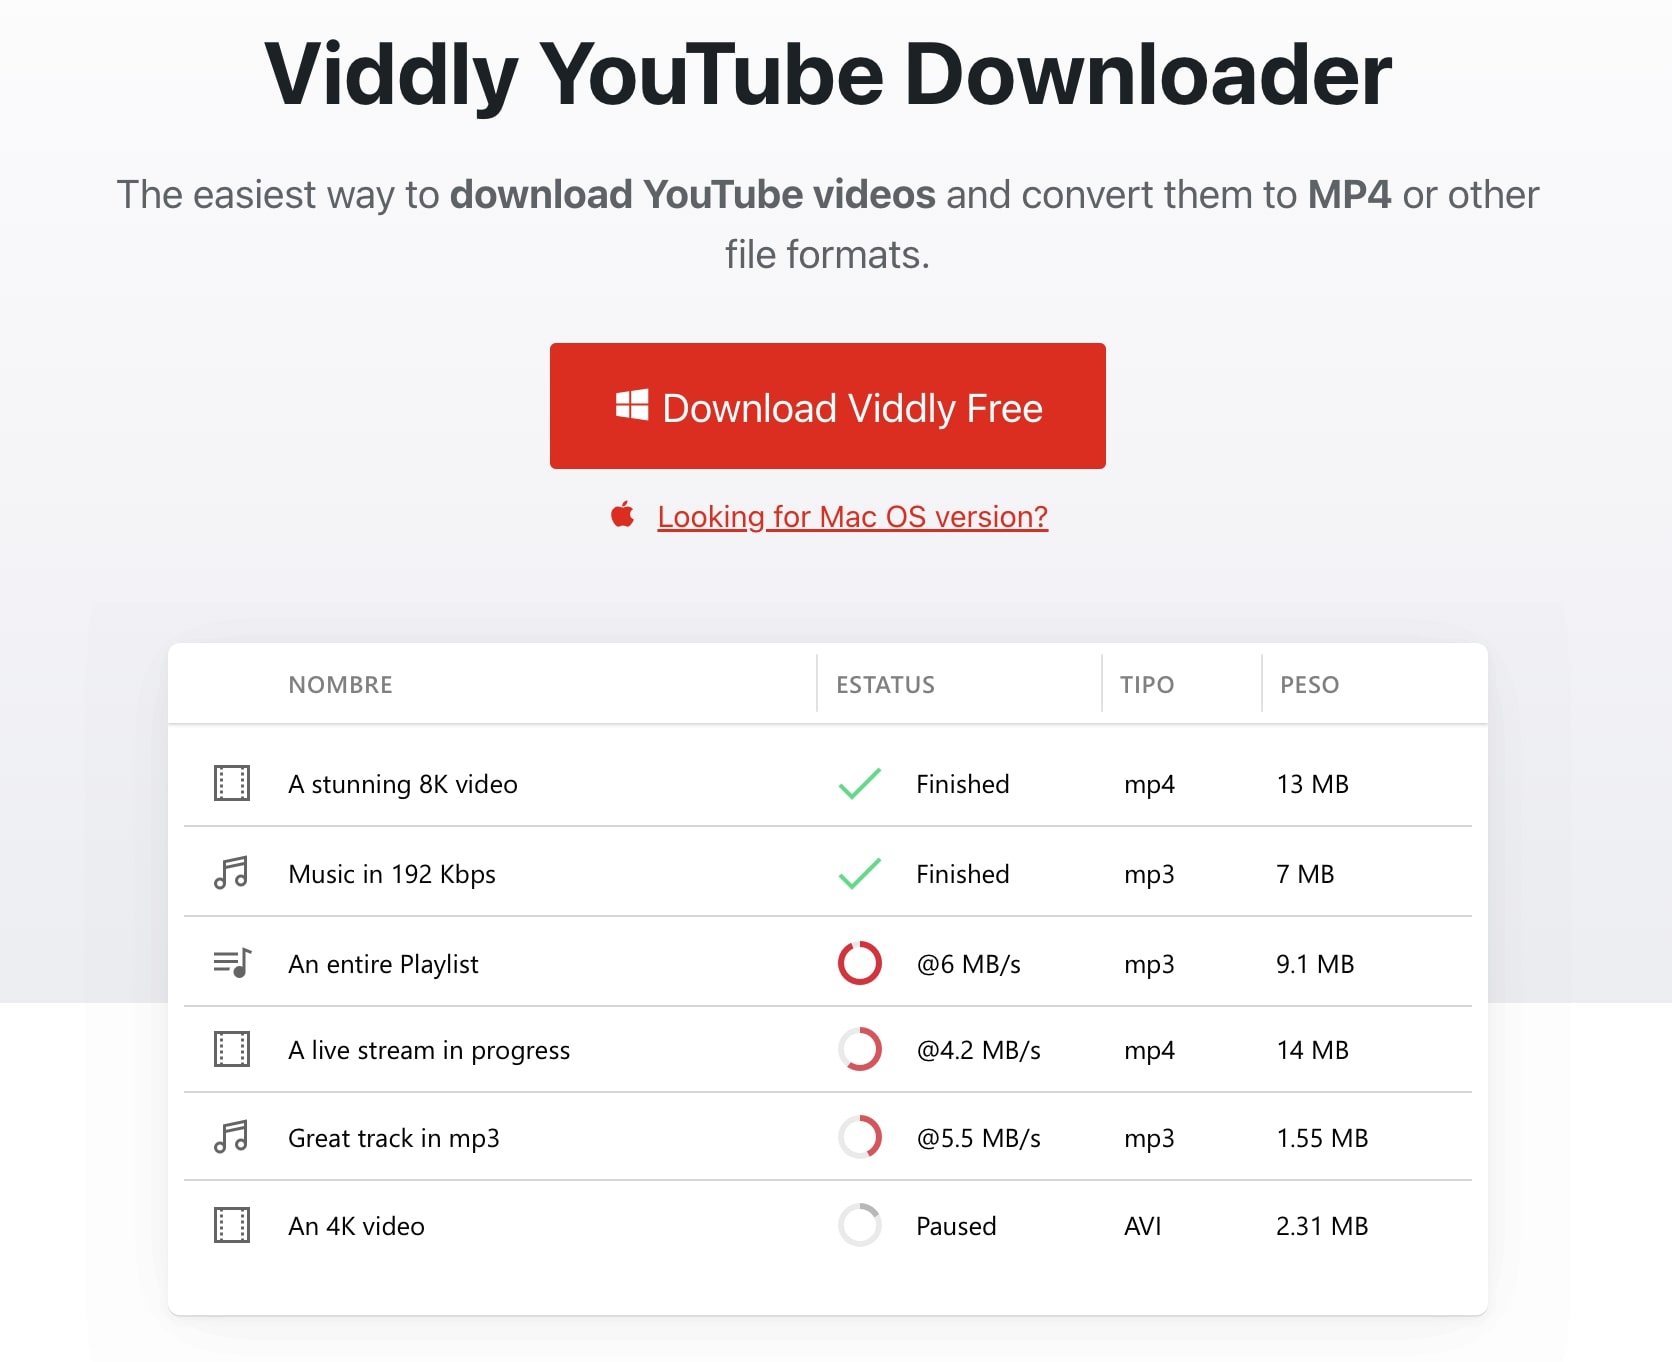  Download-YouTube-Music-Playlist-Viddly  